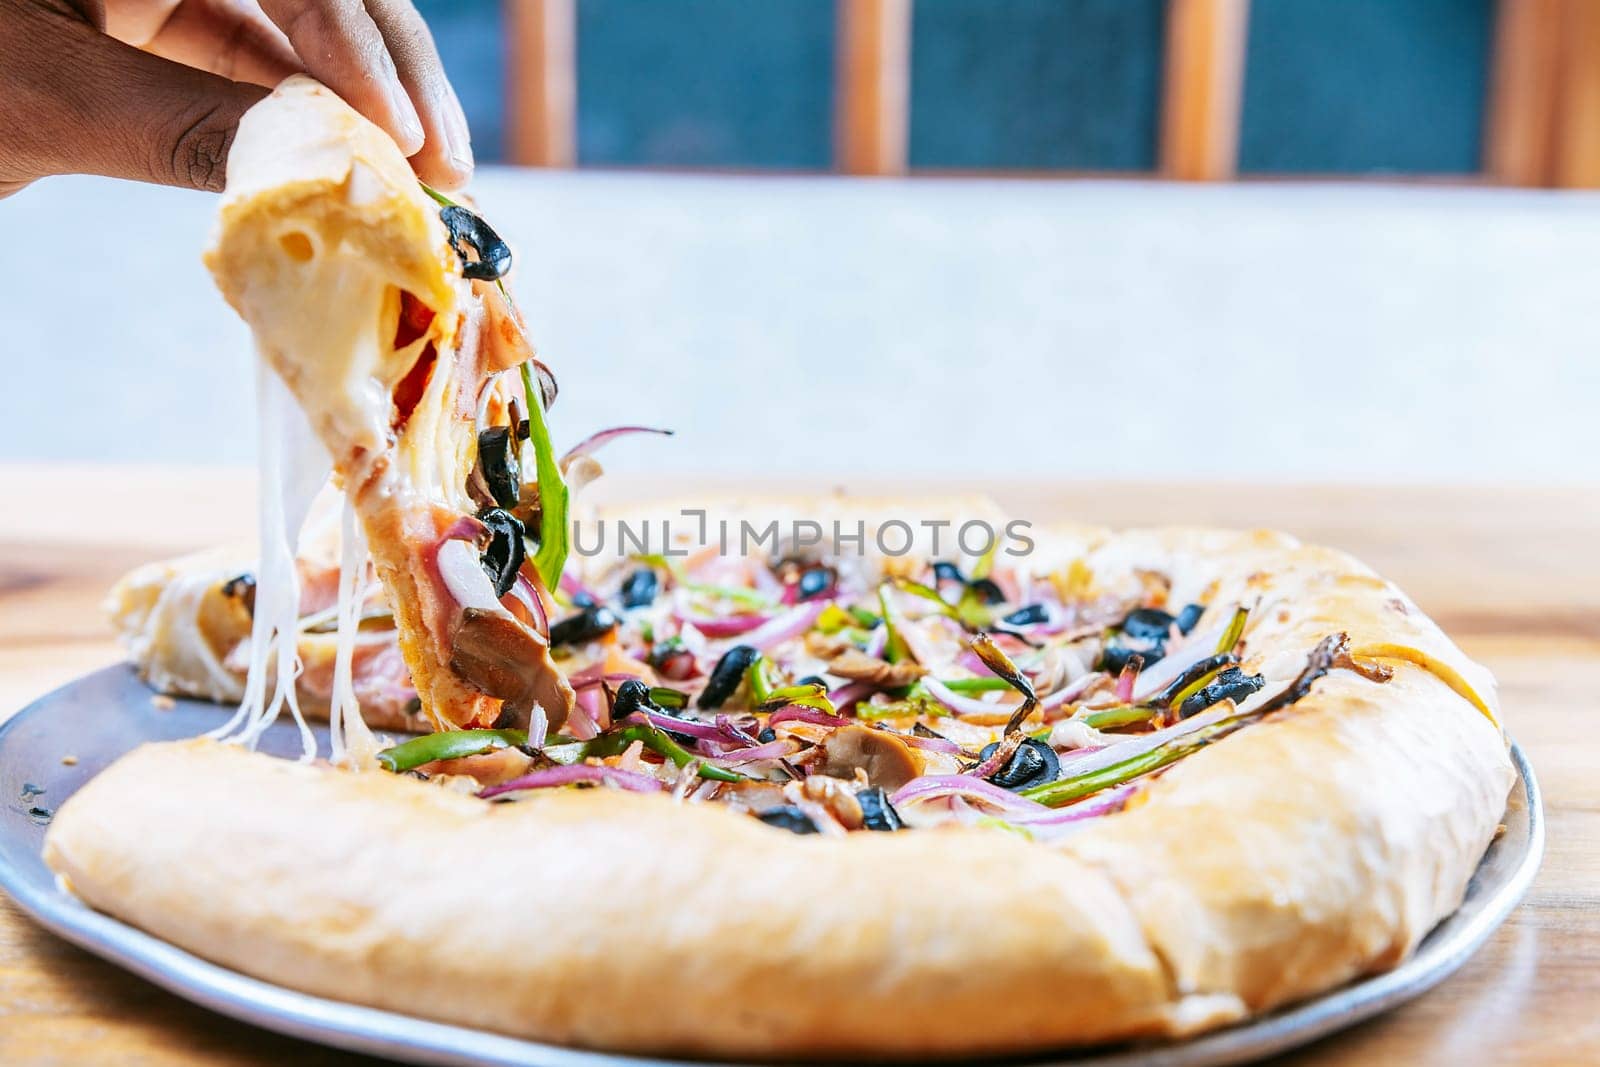 Hand taking a slice of supreme pizza on wooden table. Close-up of a hand taking a delicious slice of supreme pizza with vegetables by isaiphoto